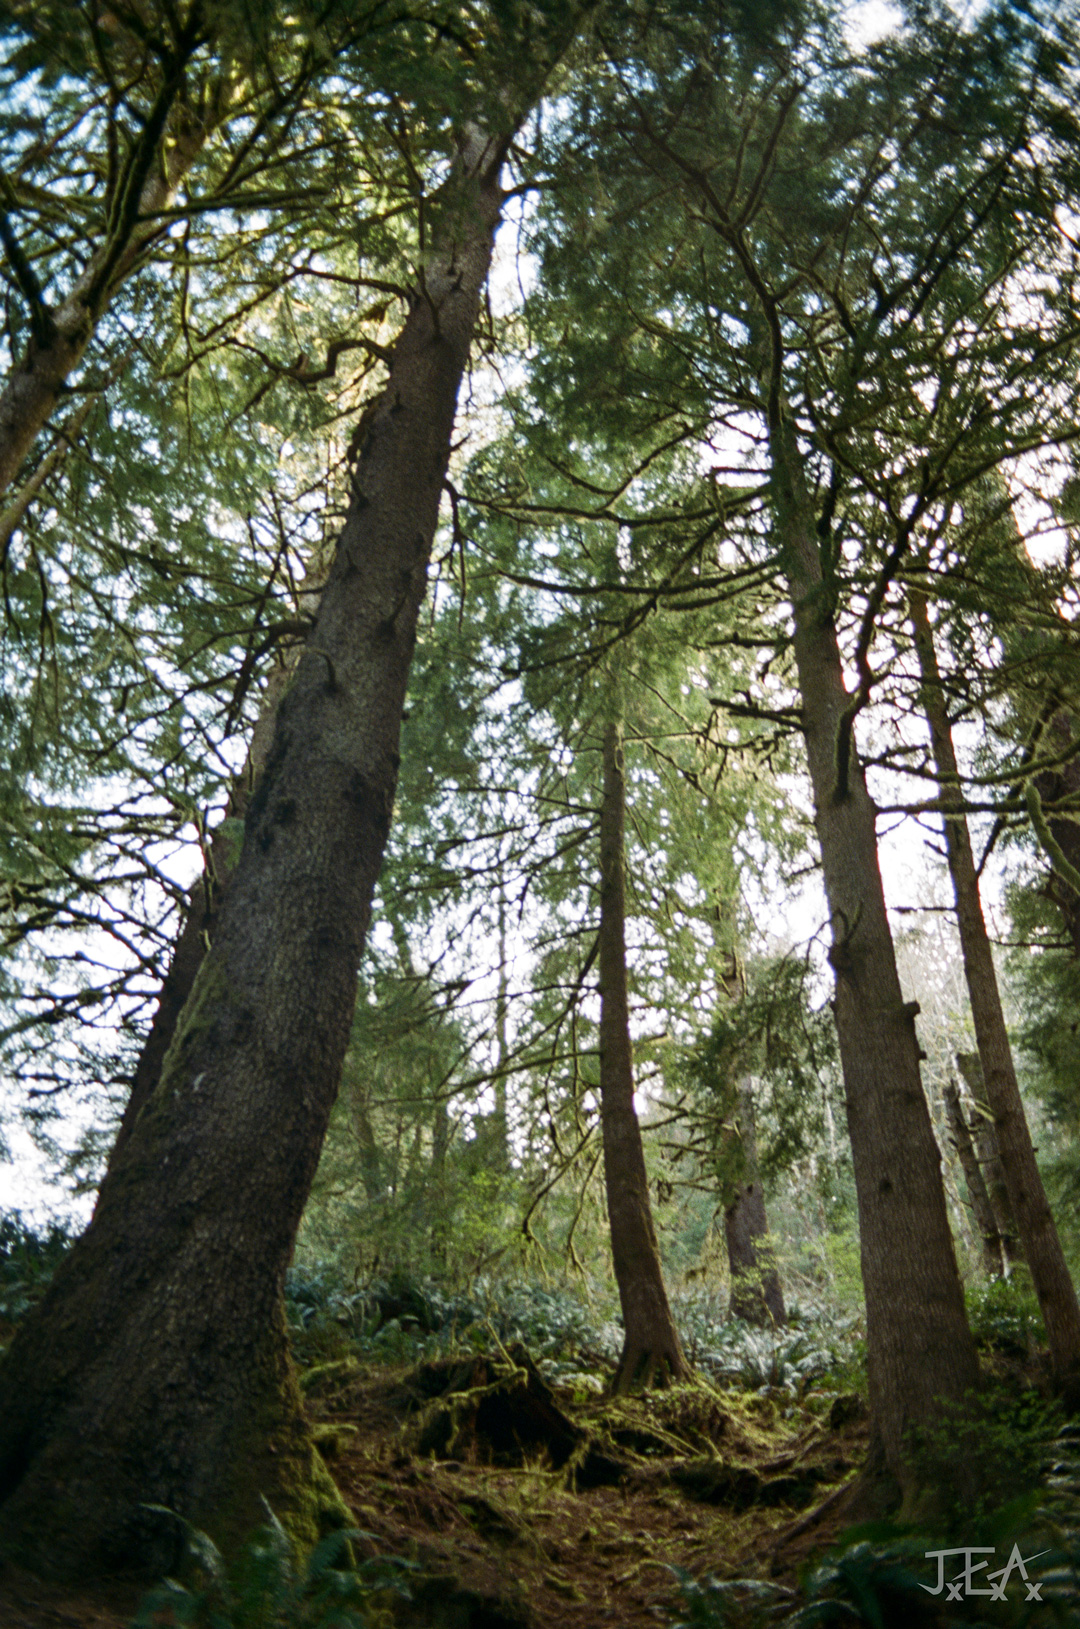 A portrait shot of the Ecola State Forest, taken looking up into the canopy from the ground.